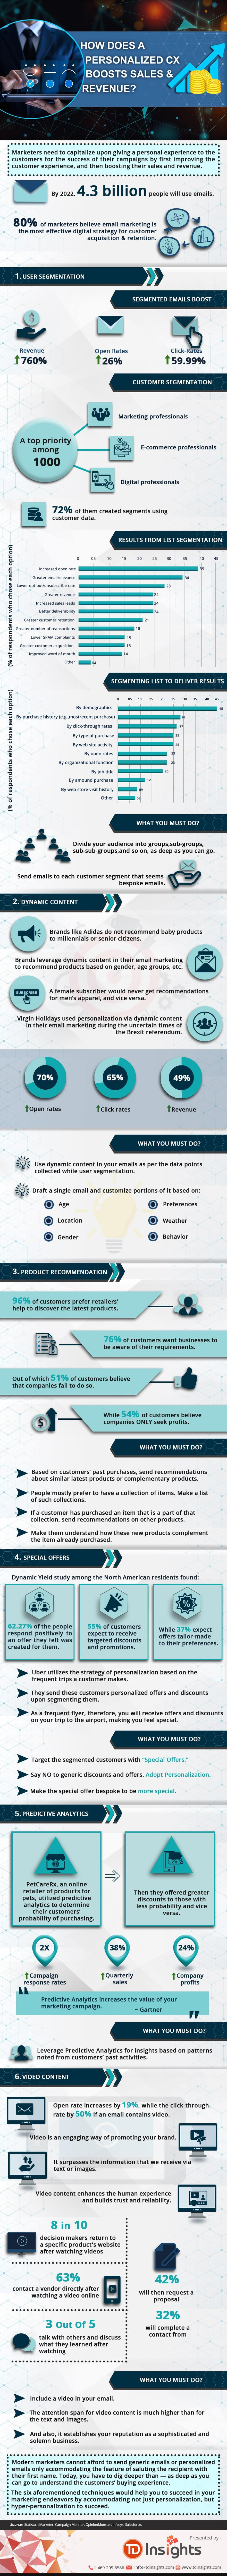 How Does a Personalized CX Boosts Sales & Revenue?